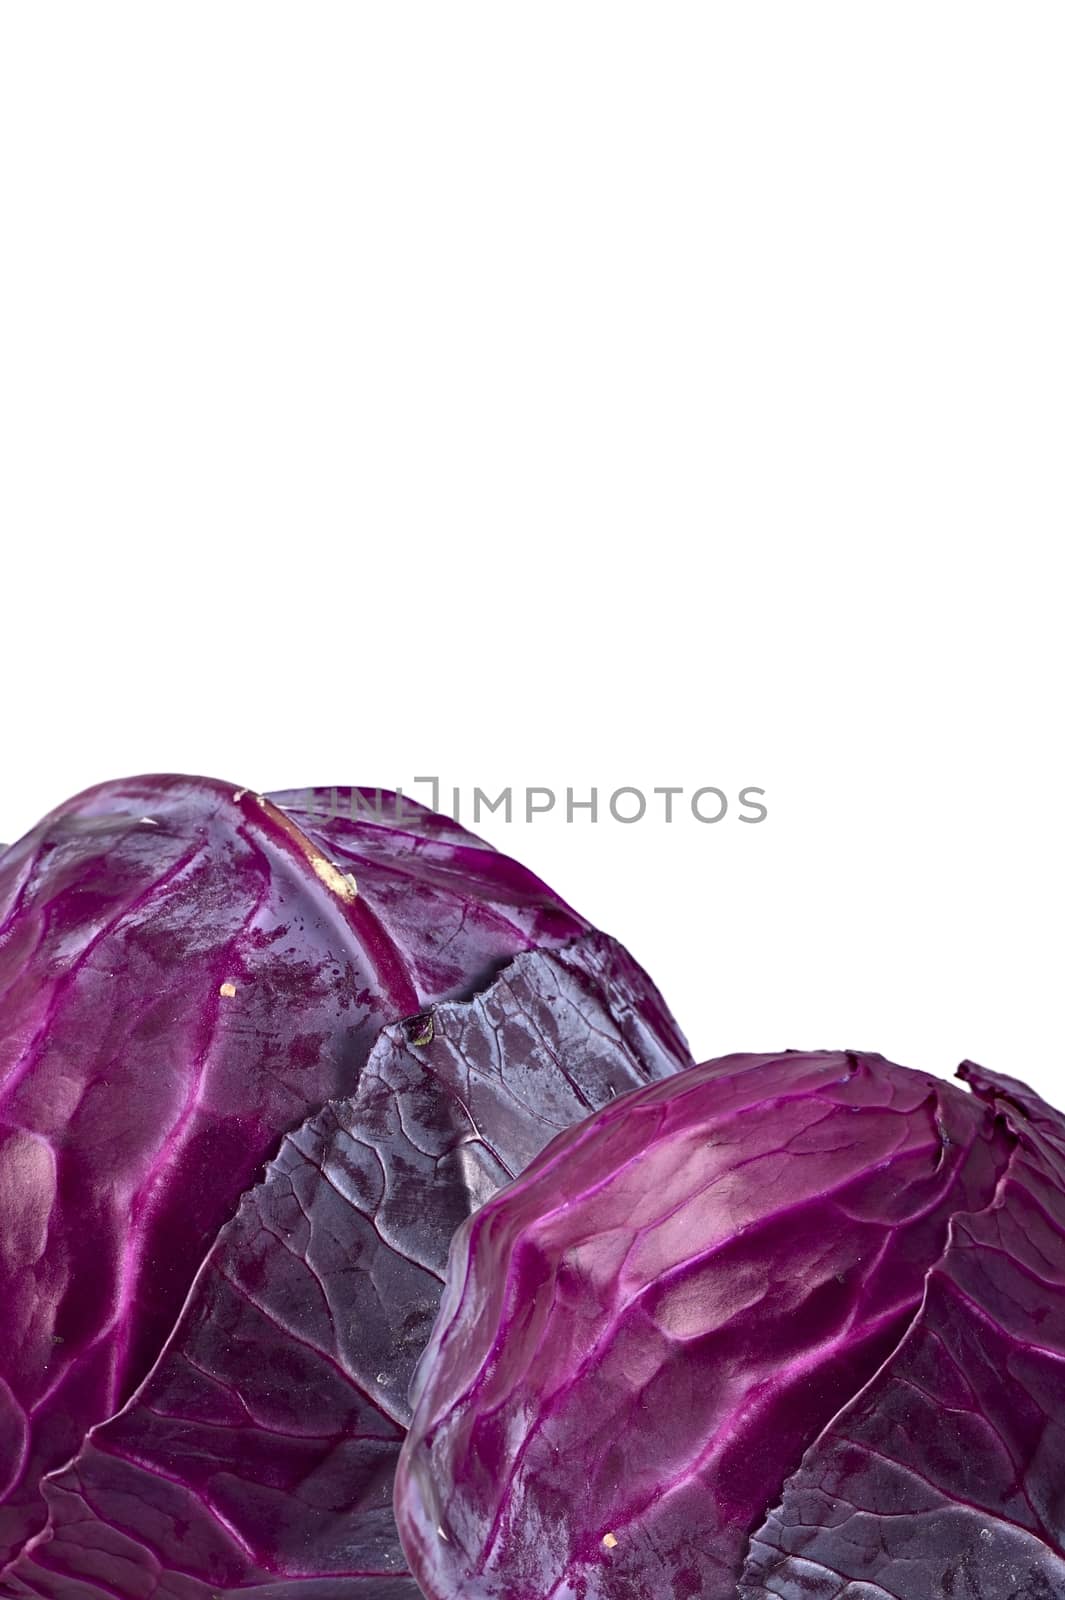 Red Cabbage Isolated on White. Red Cabbage Copy Space. Vegetables Photo Collection.